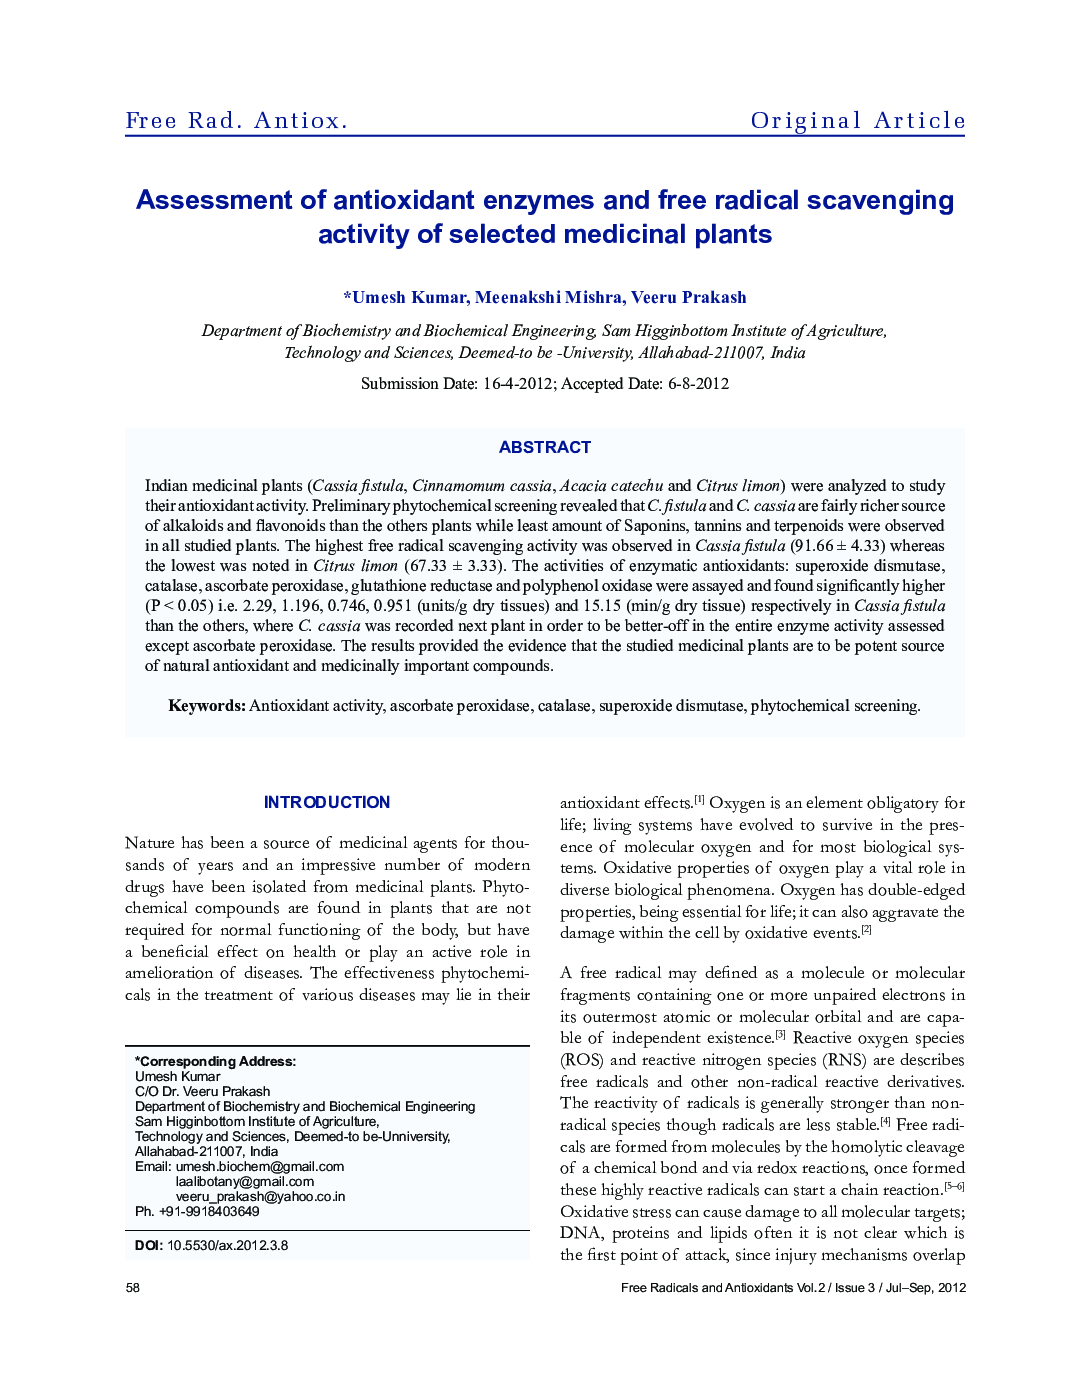 Assessment of antioxidant enzymes and free radical scavenging activity of selected medicinal plants